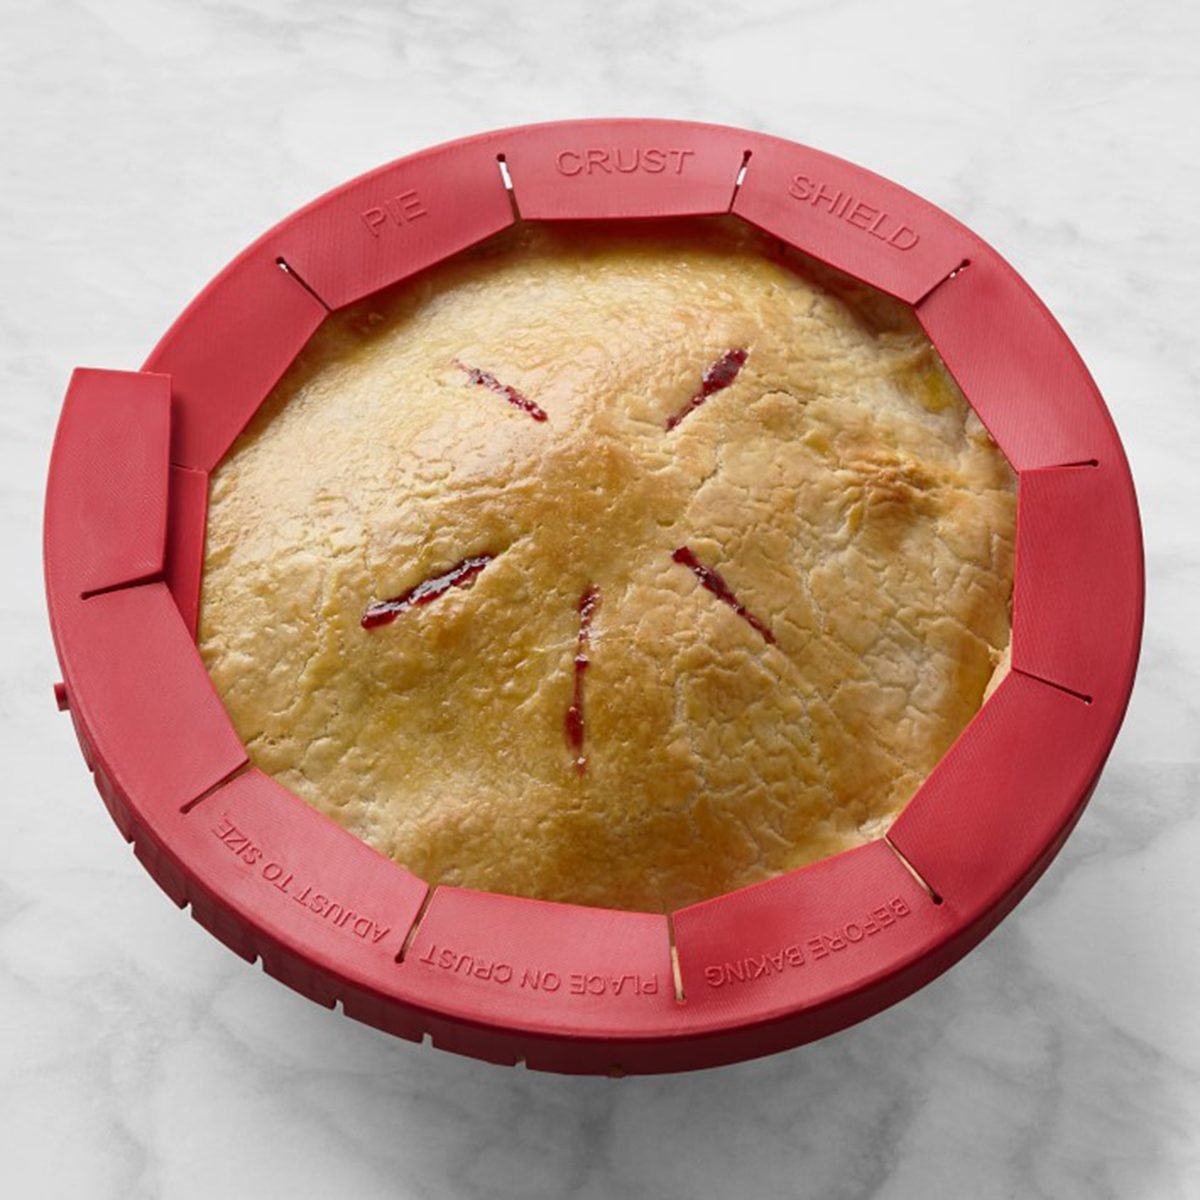 https://www.tasteofhome.com/wp-content/uploads/2021/10/Silicone-Pie-Shield.jpg?fit=700%2C700